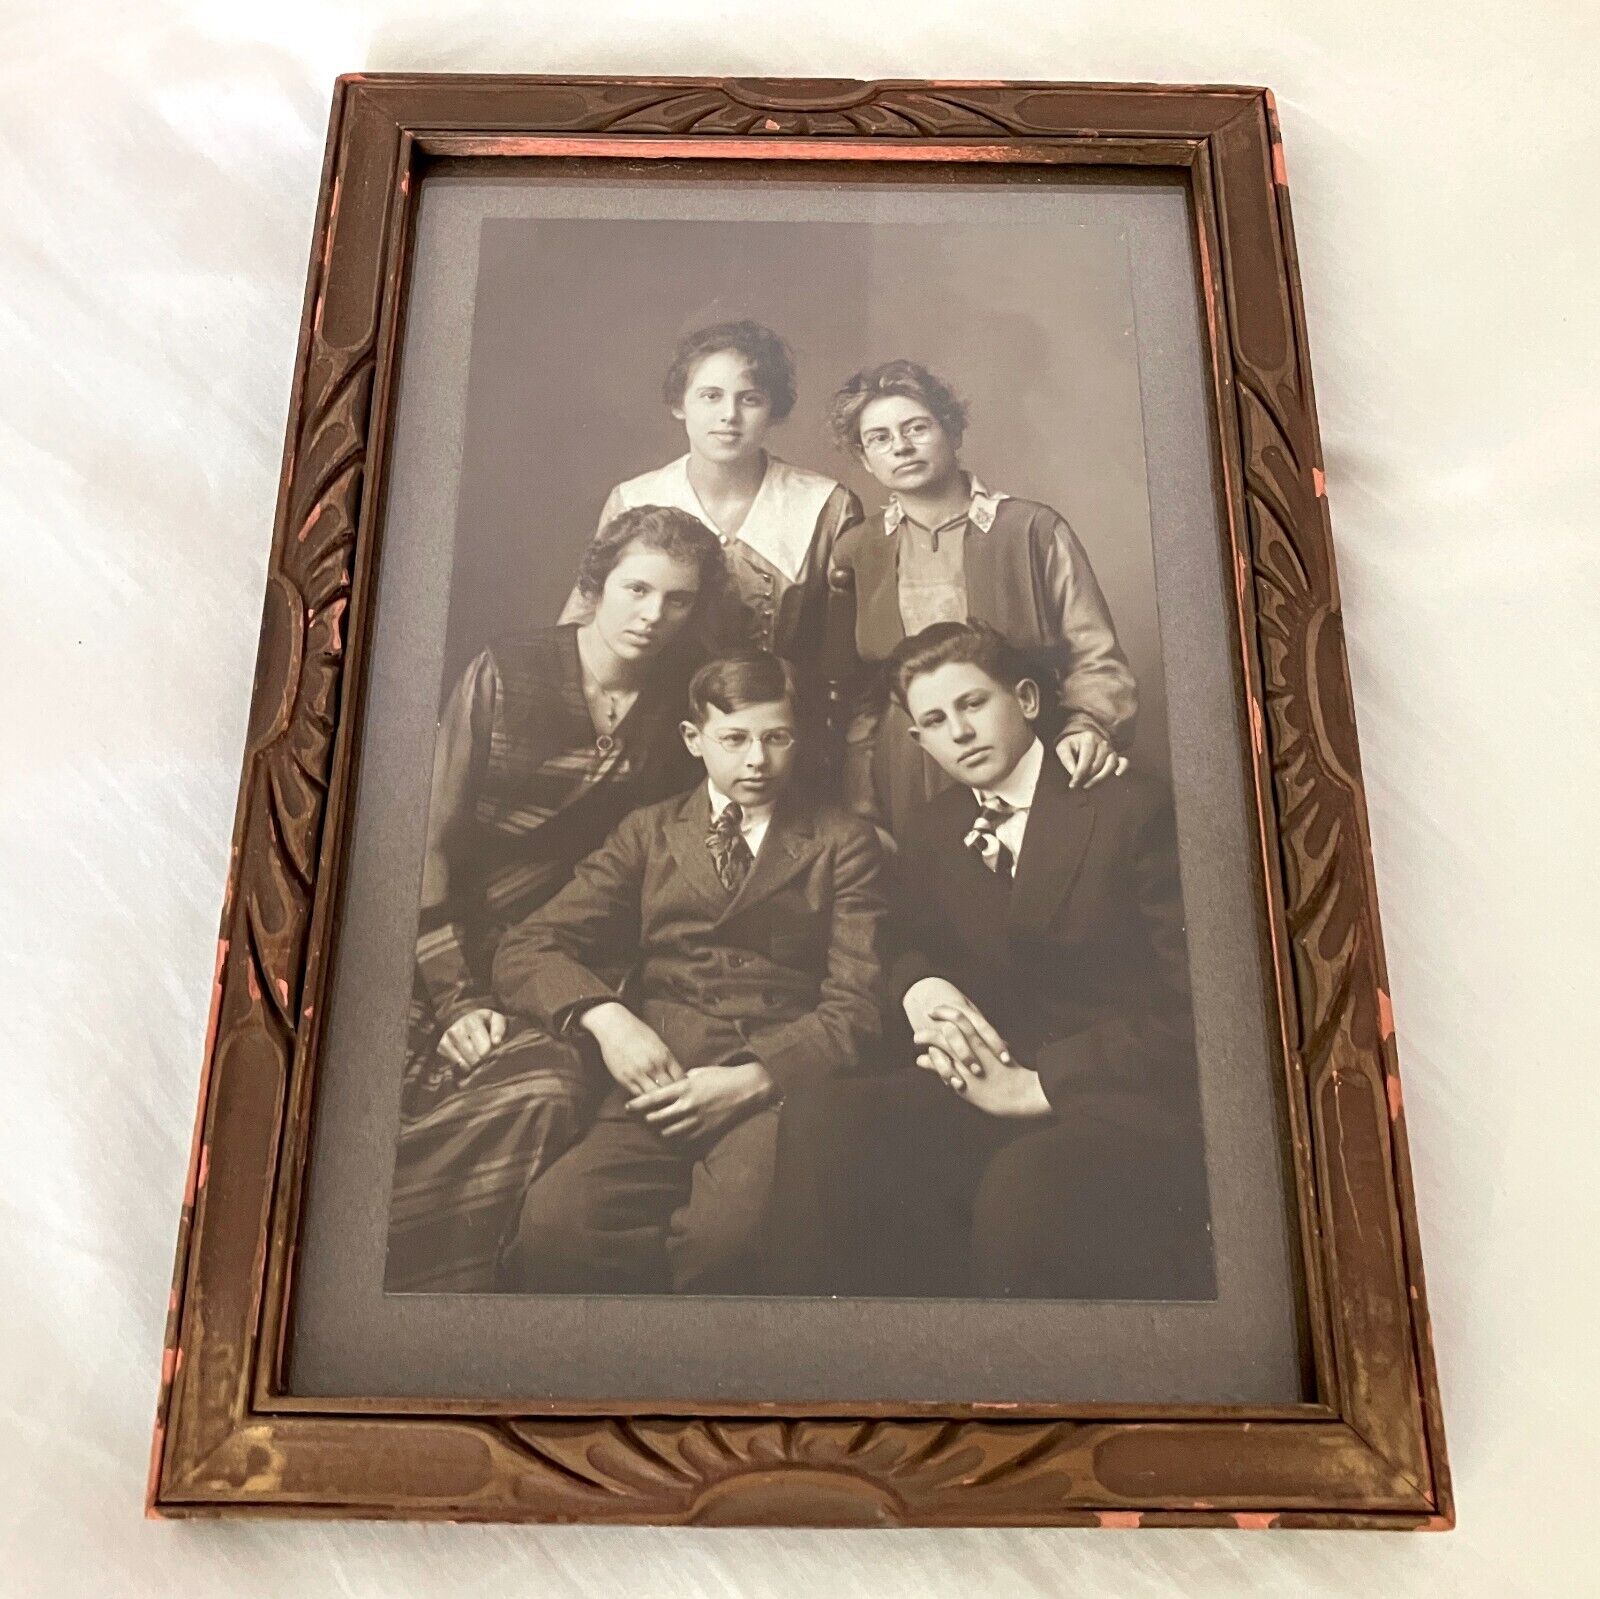 Antique 1910s WW1 Era Framed Family Photo, Mother, Daughter & Sons in Suits